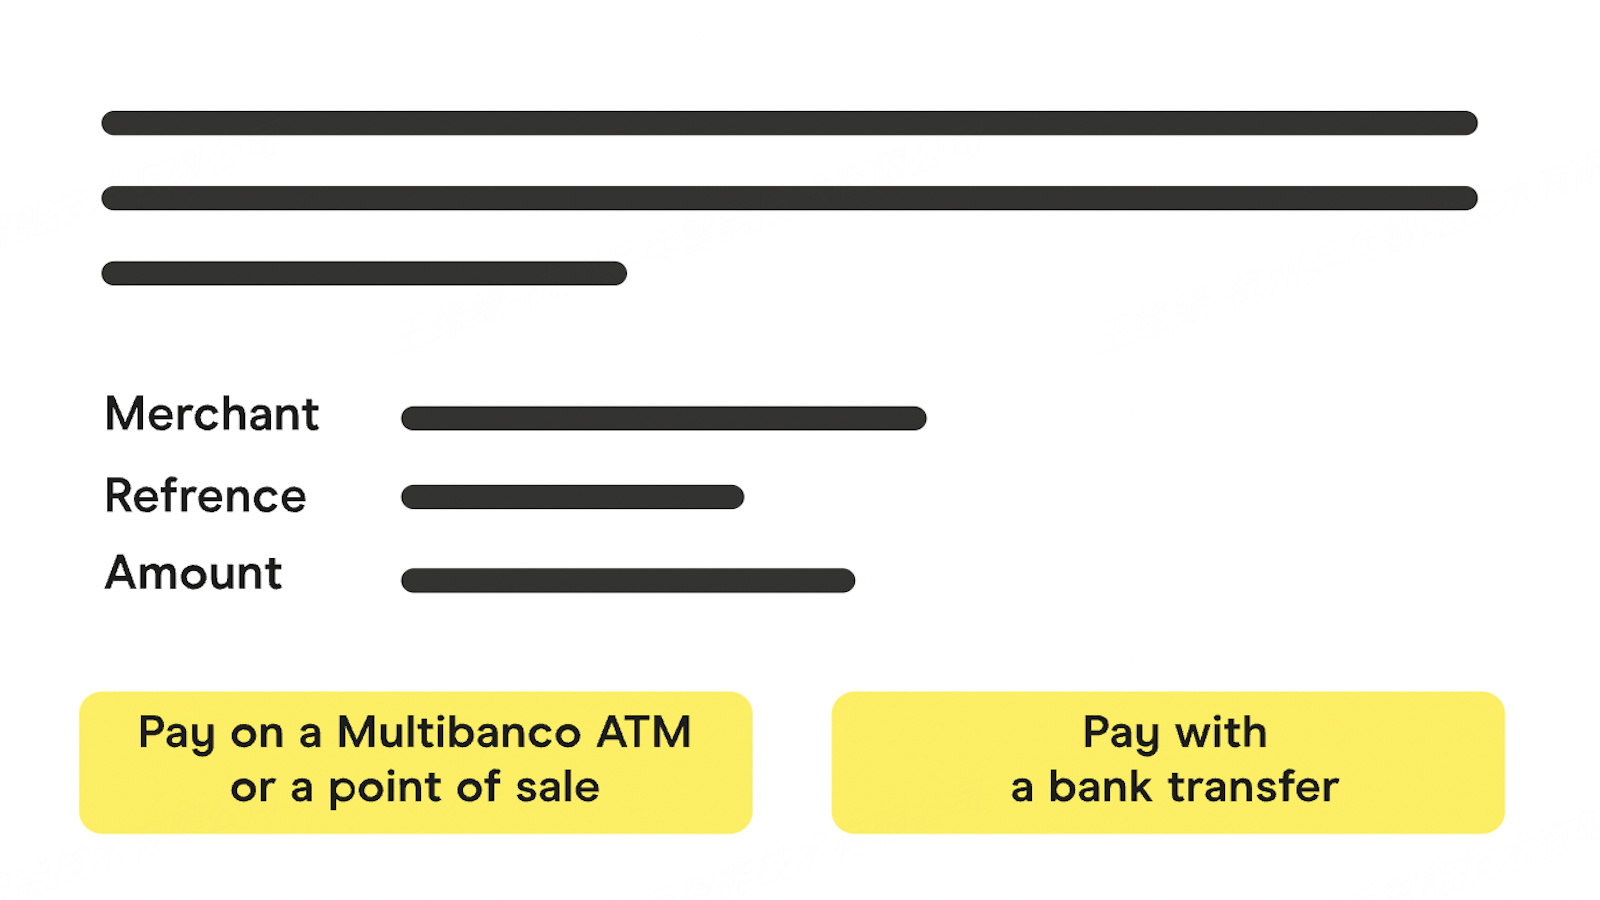 Providing Multibanco order reference numbers